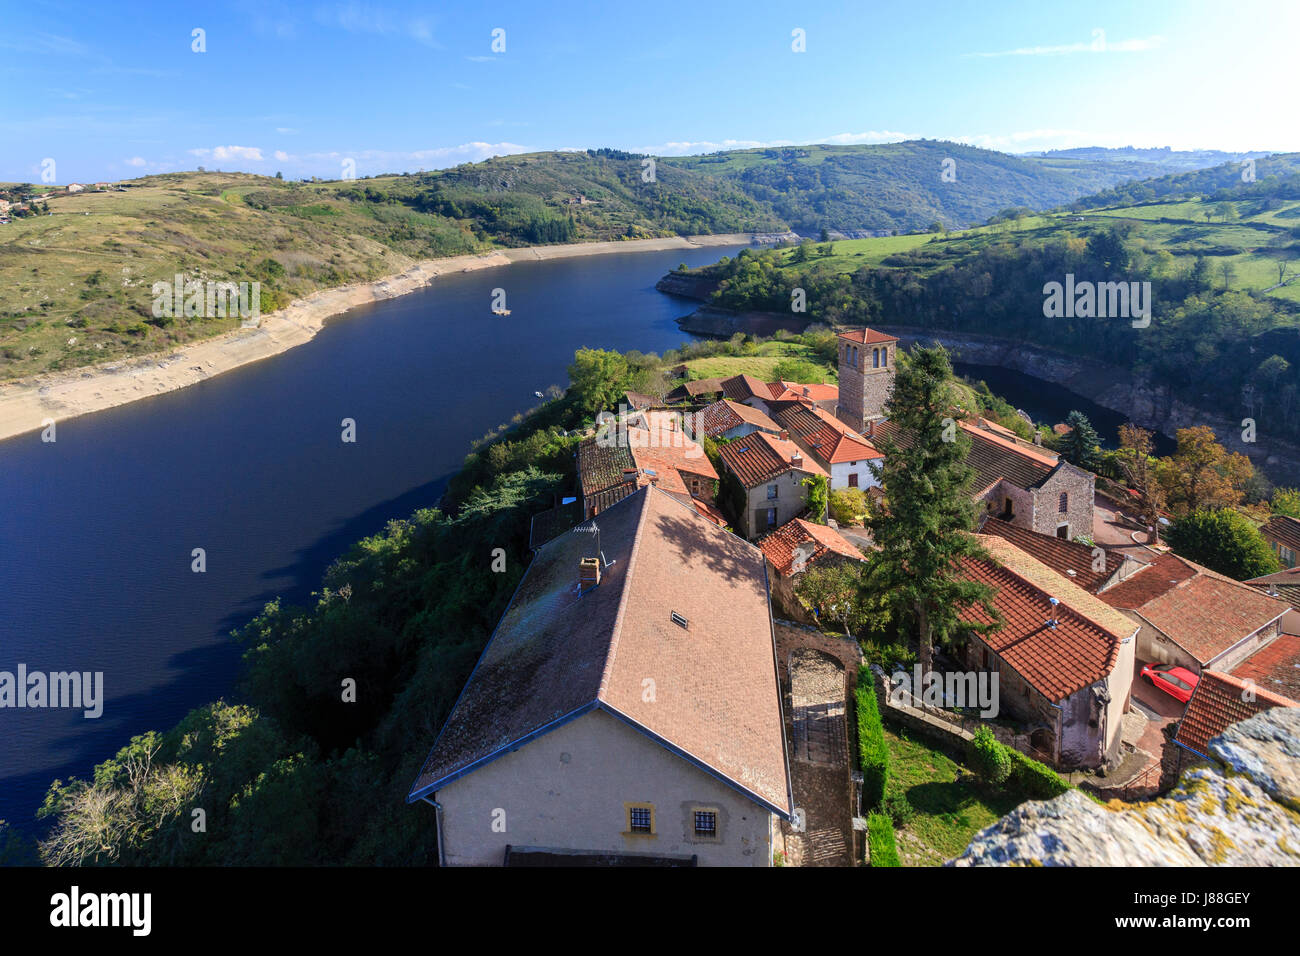 France, Loire, Saint-Jean-Saint-Maurice-sur-Loire, view from the top of the tower over the village and the Loire who is also Villerest lake (dam) Stock Photo